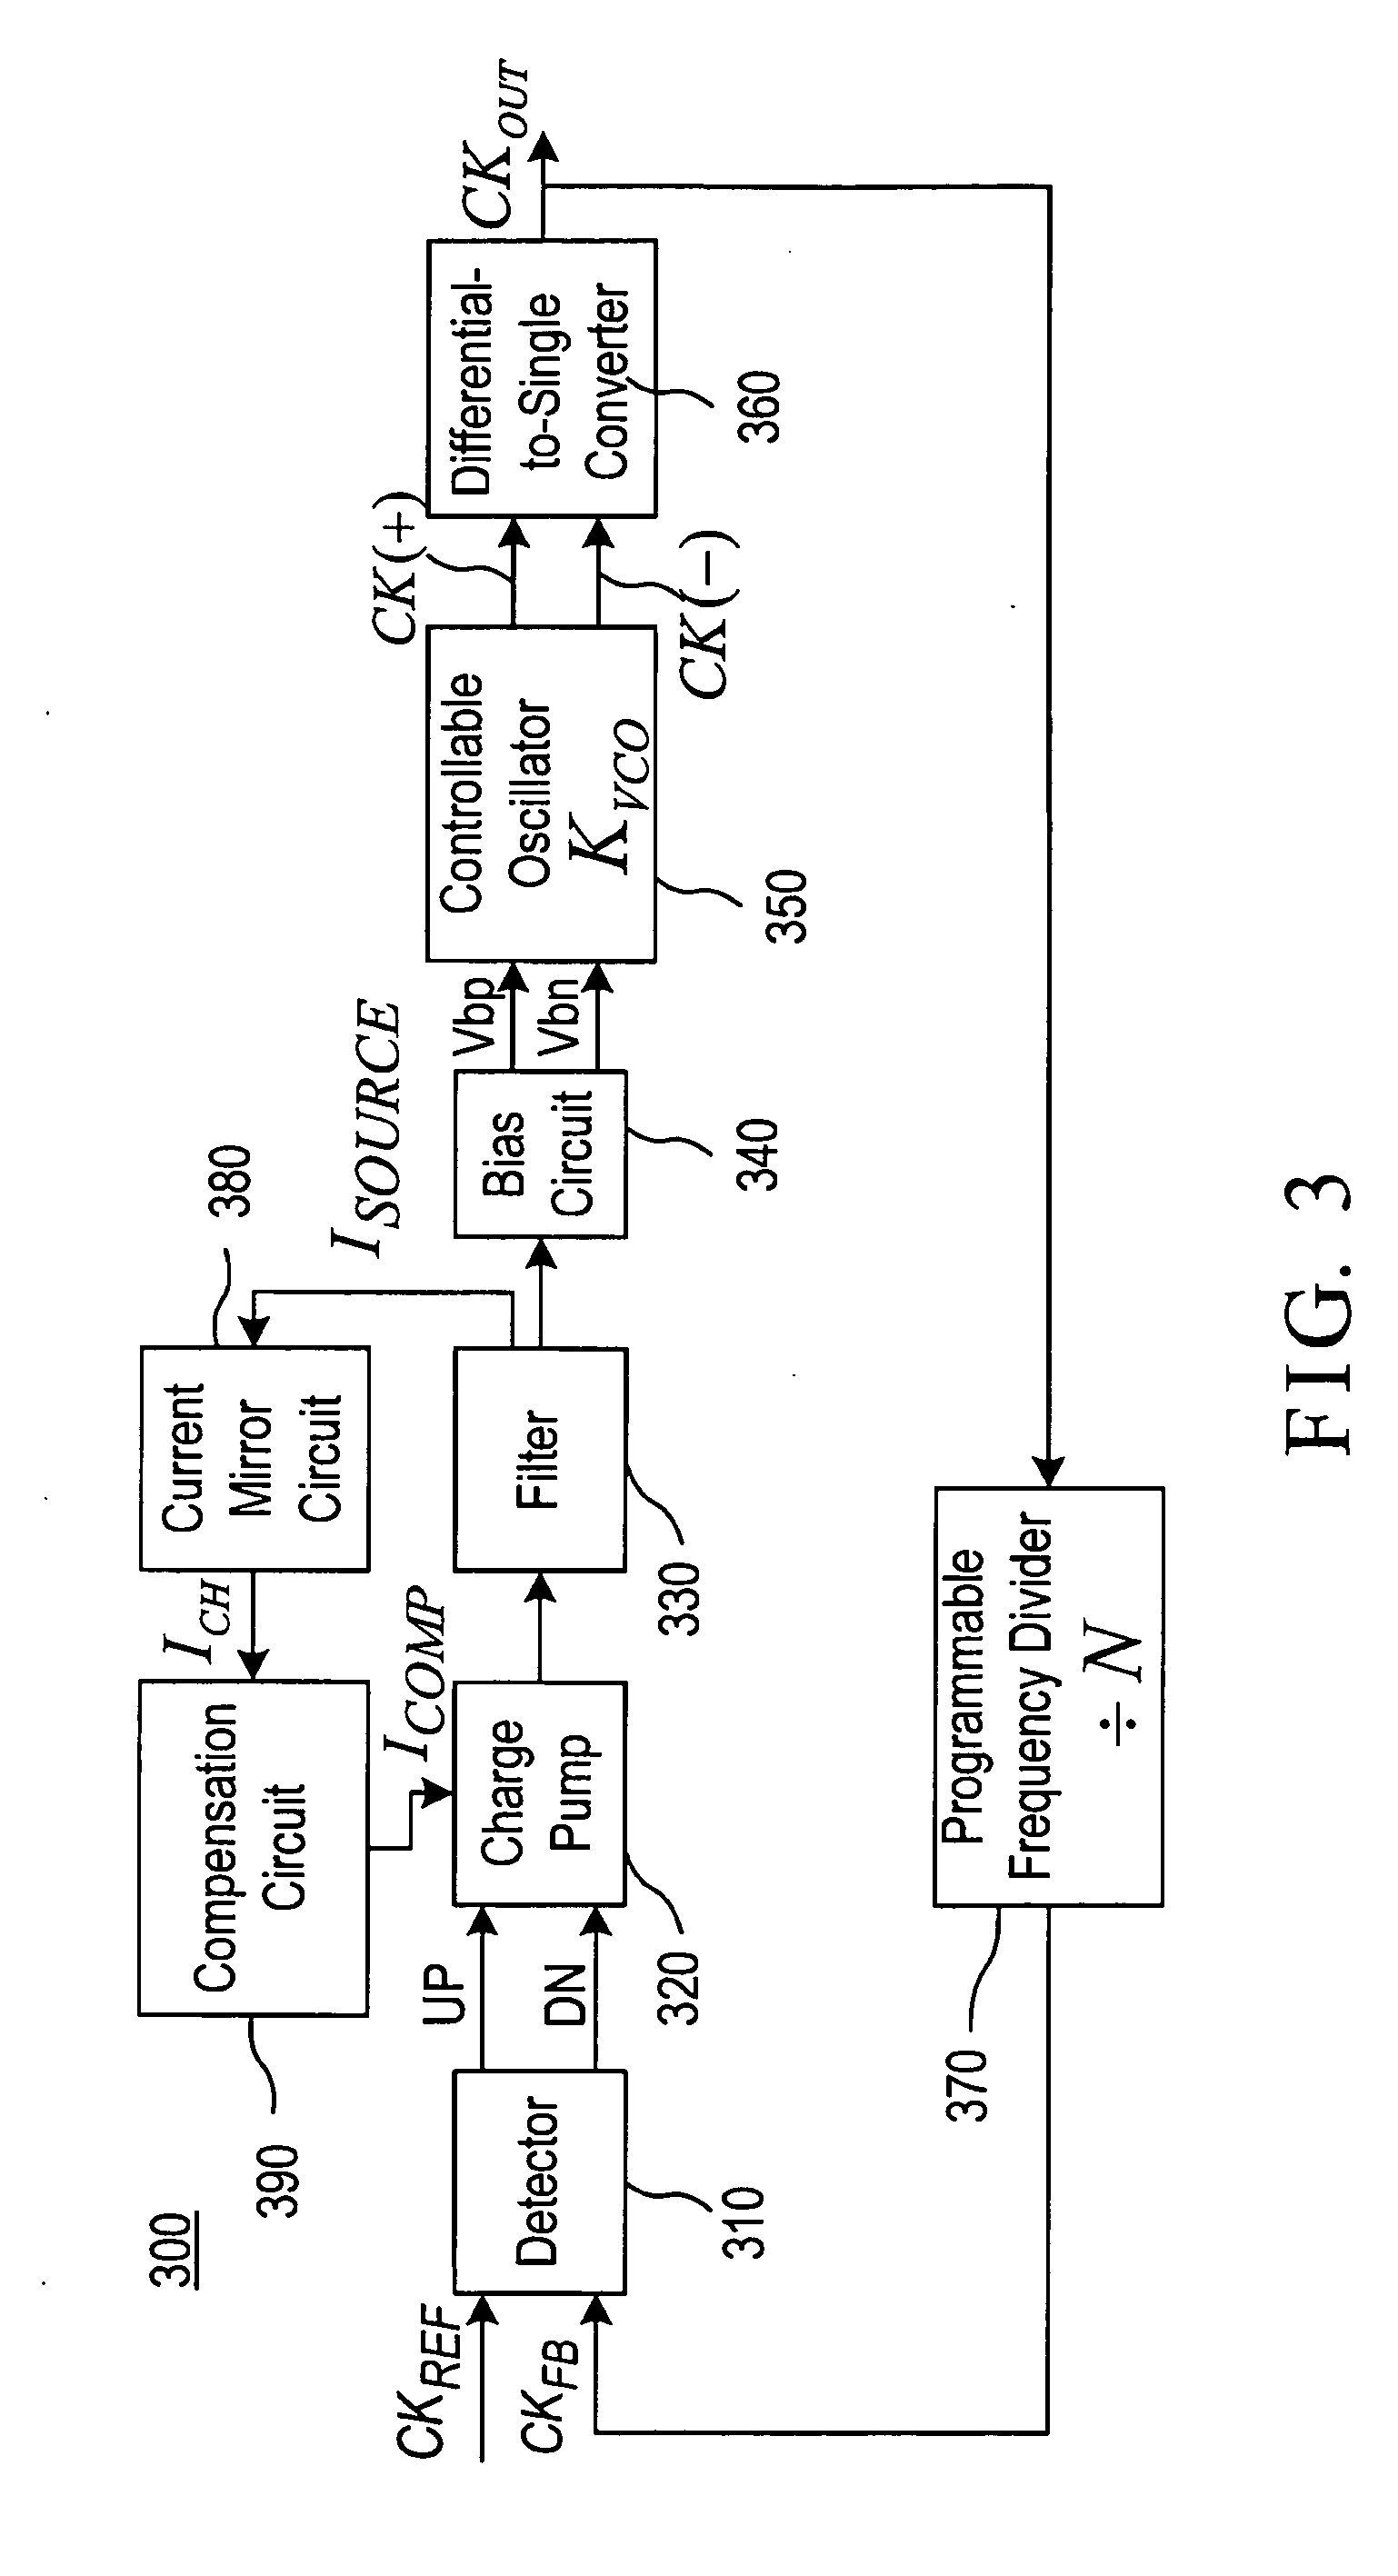 Frequency synthesis system with self-calibrated loop stability and bandwidth